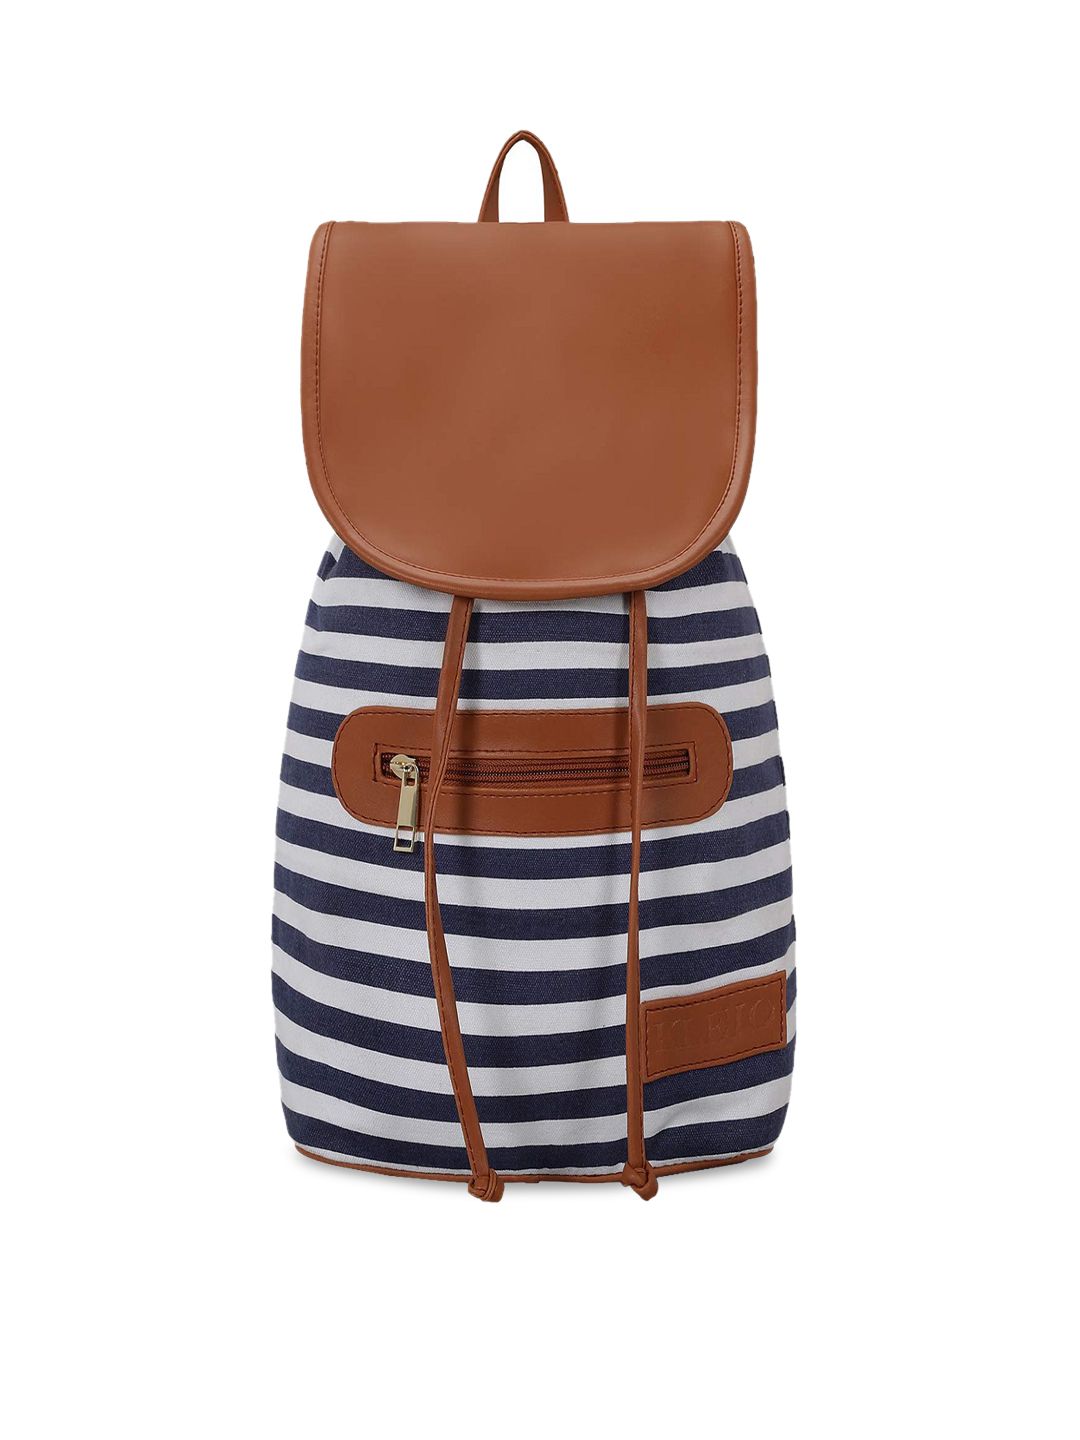 KLEIO Women Blue & Tan Brown Striped Backpack Price in India